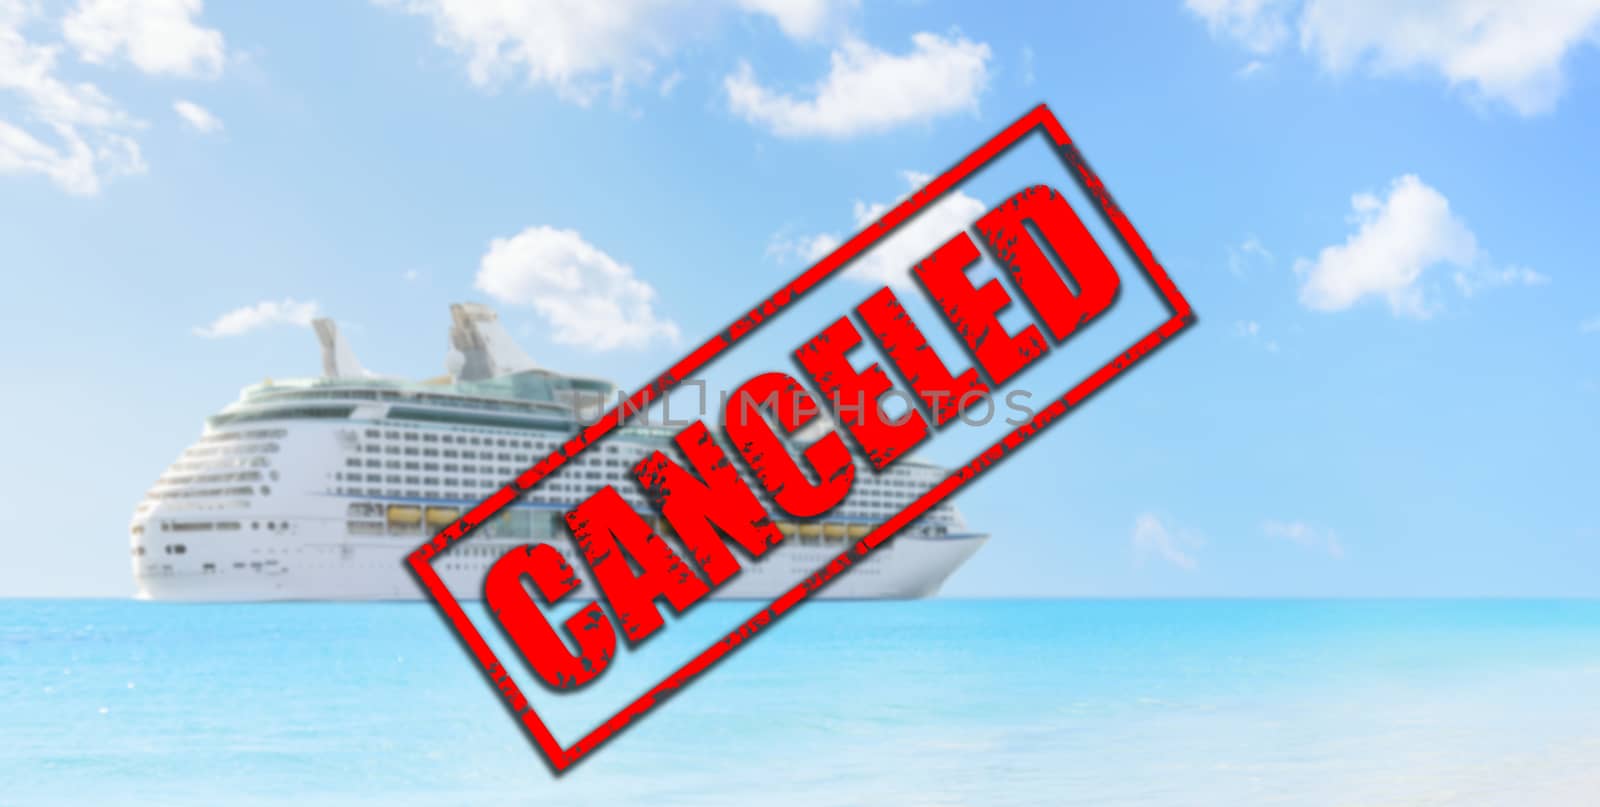 Cruise ship travel holidays canceled because of coronavirus or other reason. Crisis in the cruise industry due to corona virus covid-19 or other reason. Canceled red stamp text on cruise ship.